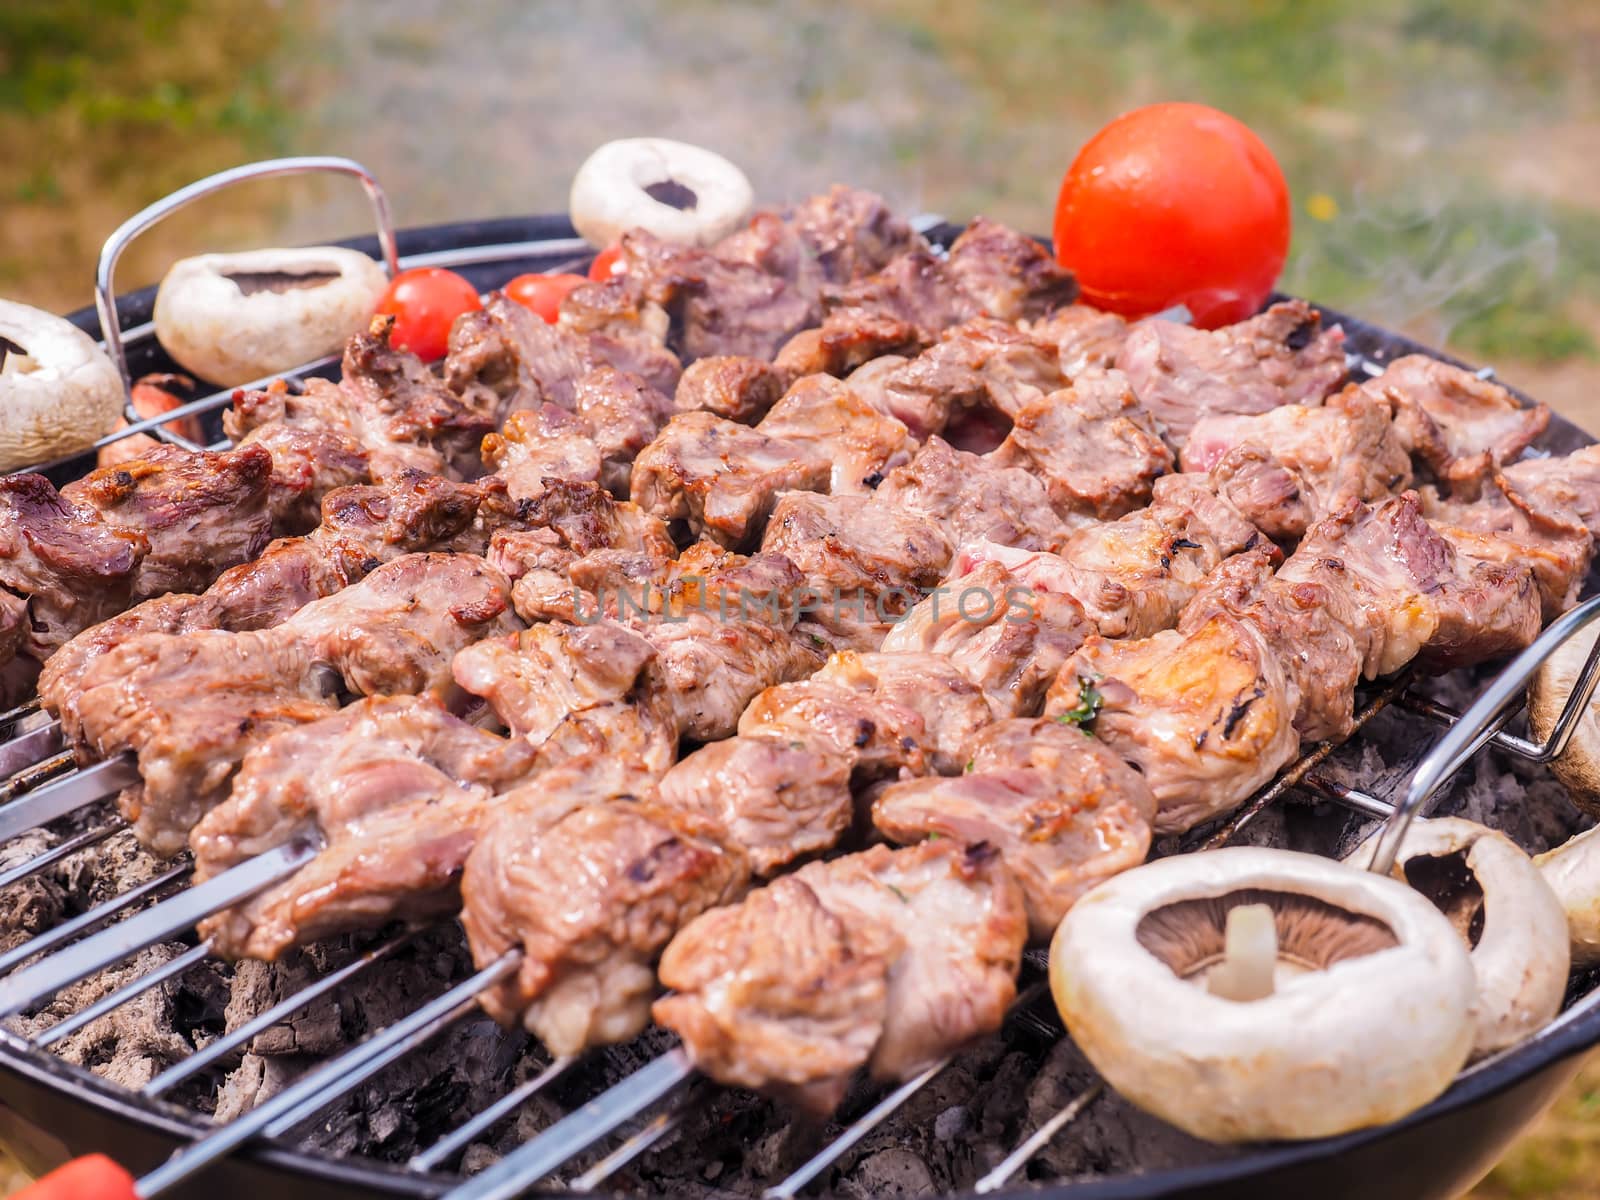 Shish kebab prepared over a black round shaped charcoal barbecue by Arvebettum